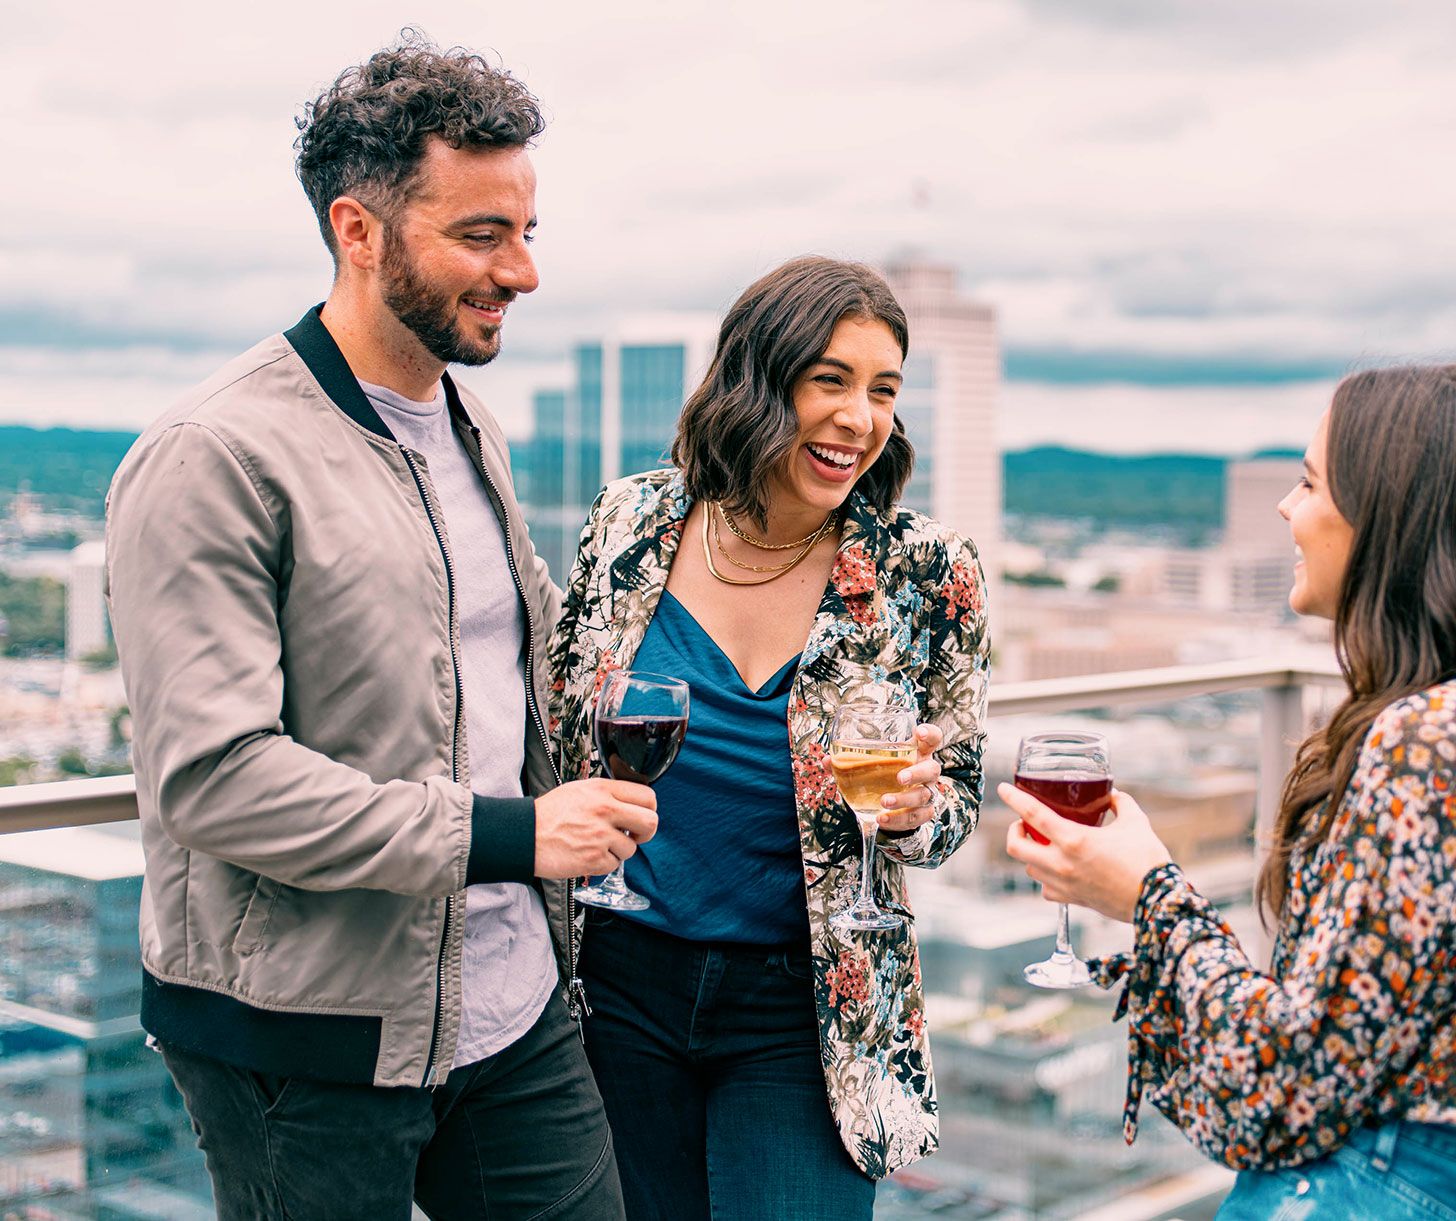 Group of people talking with drinks on rooftop